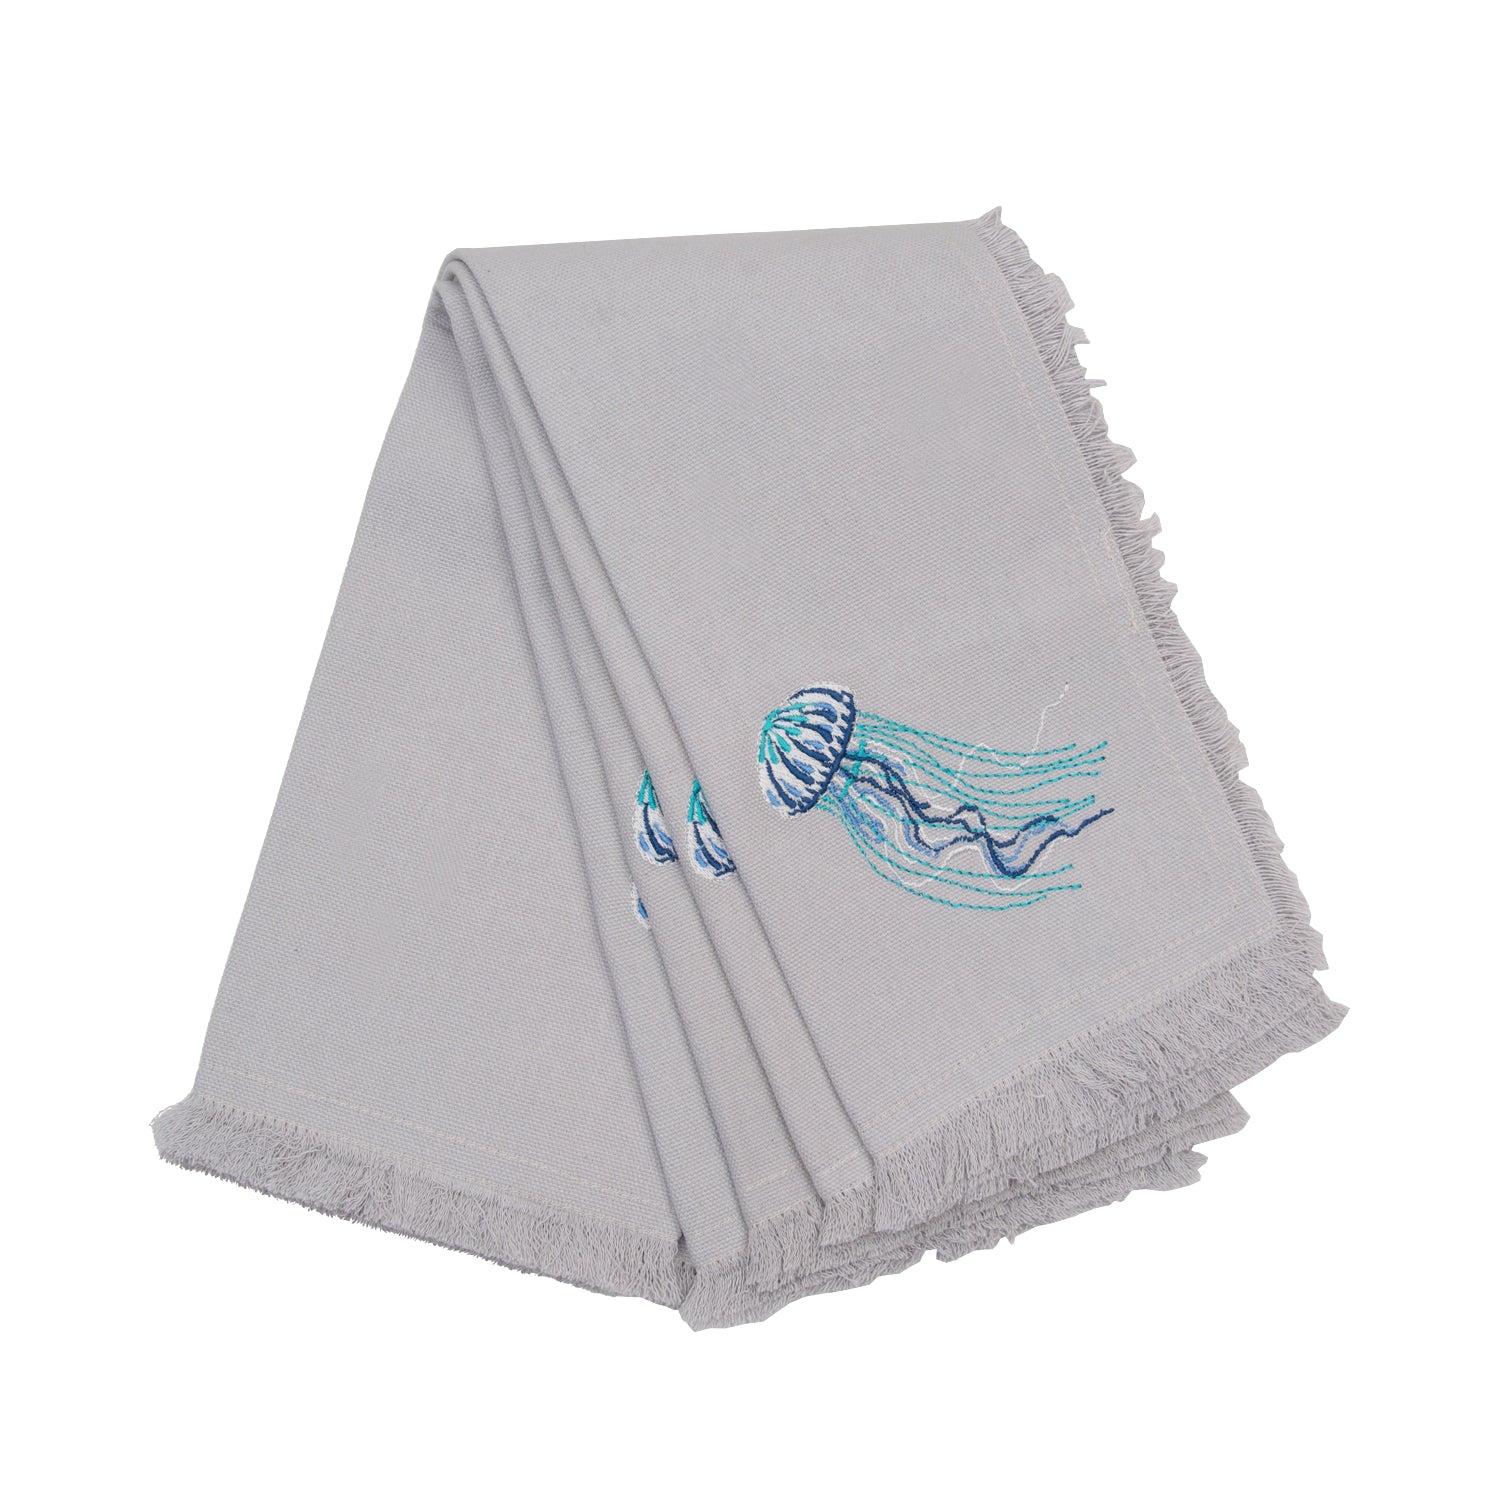 Navy and turquoise jellyfish embroidered on a grey cotton fringed napkin.